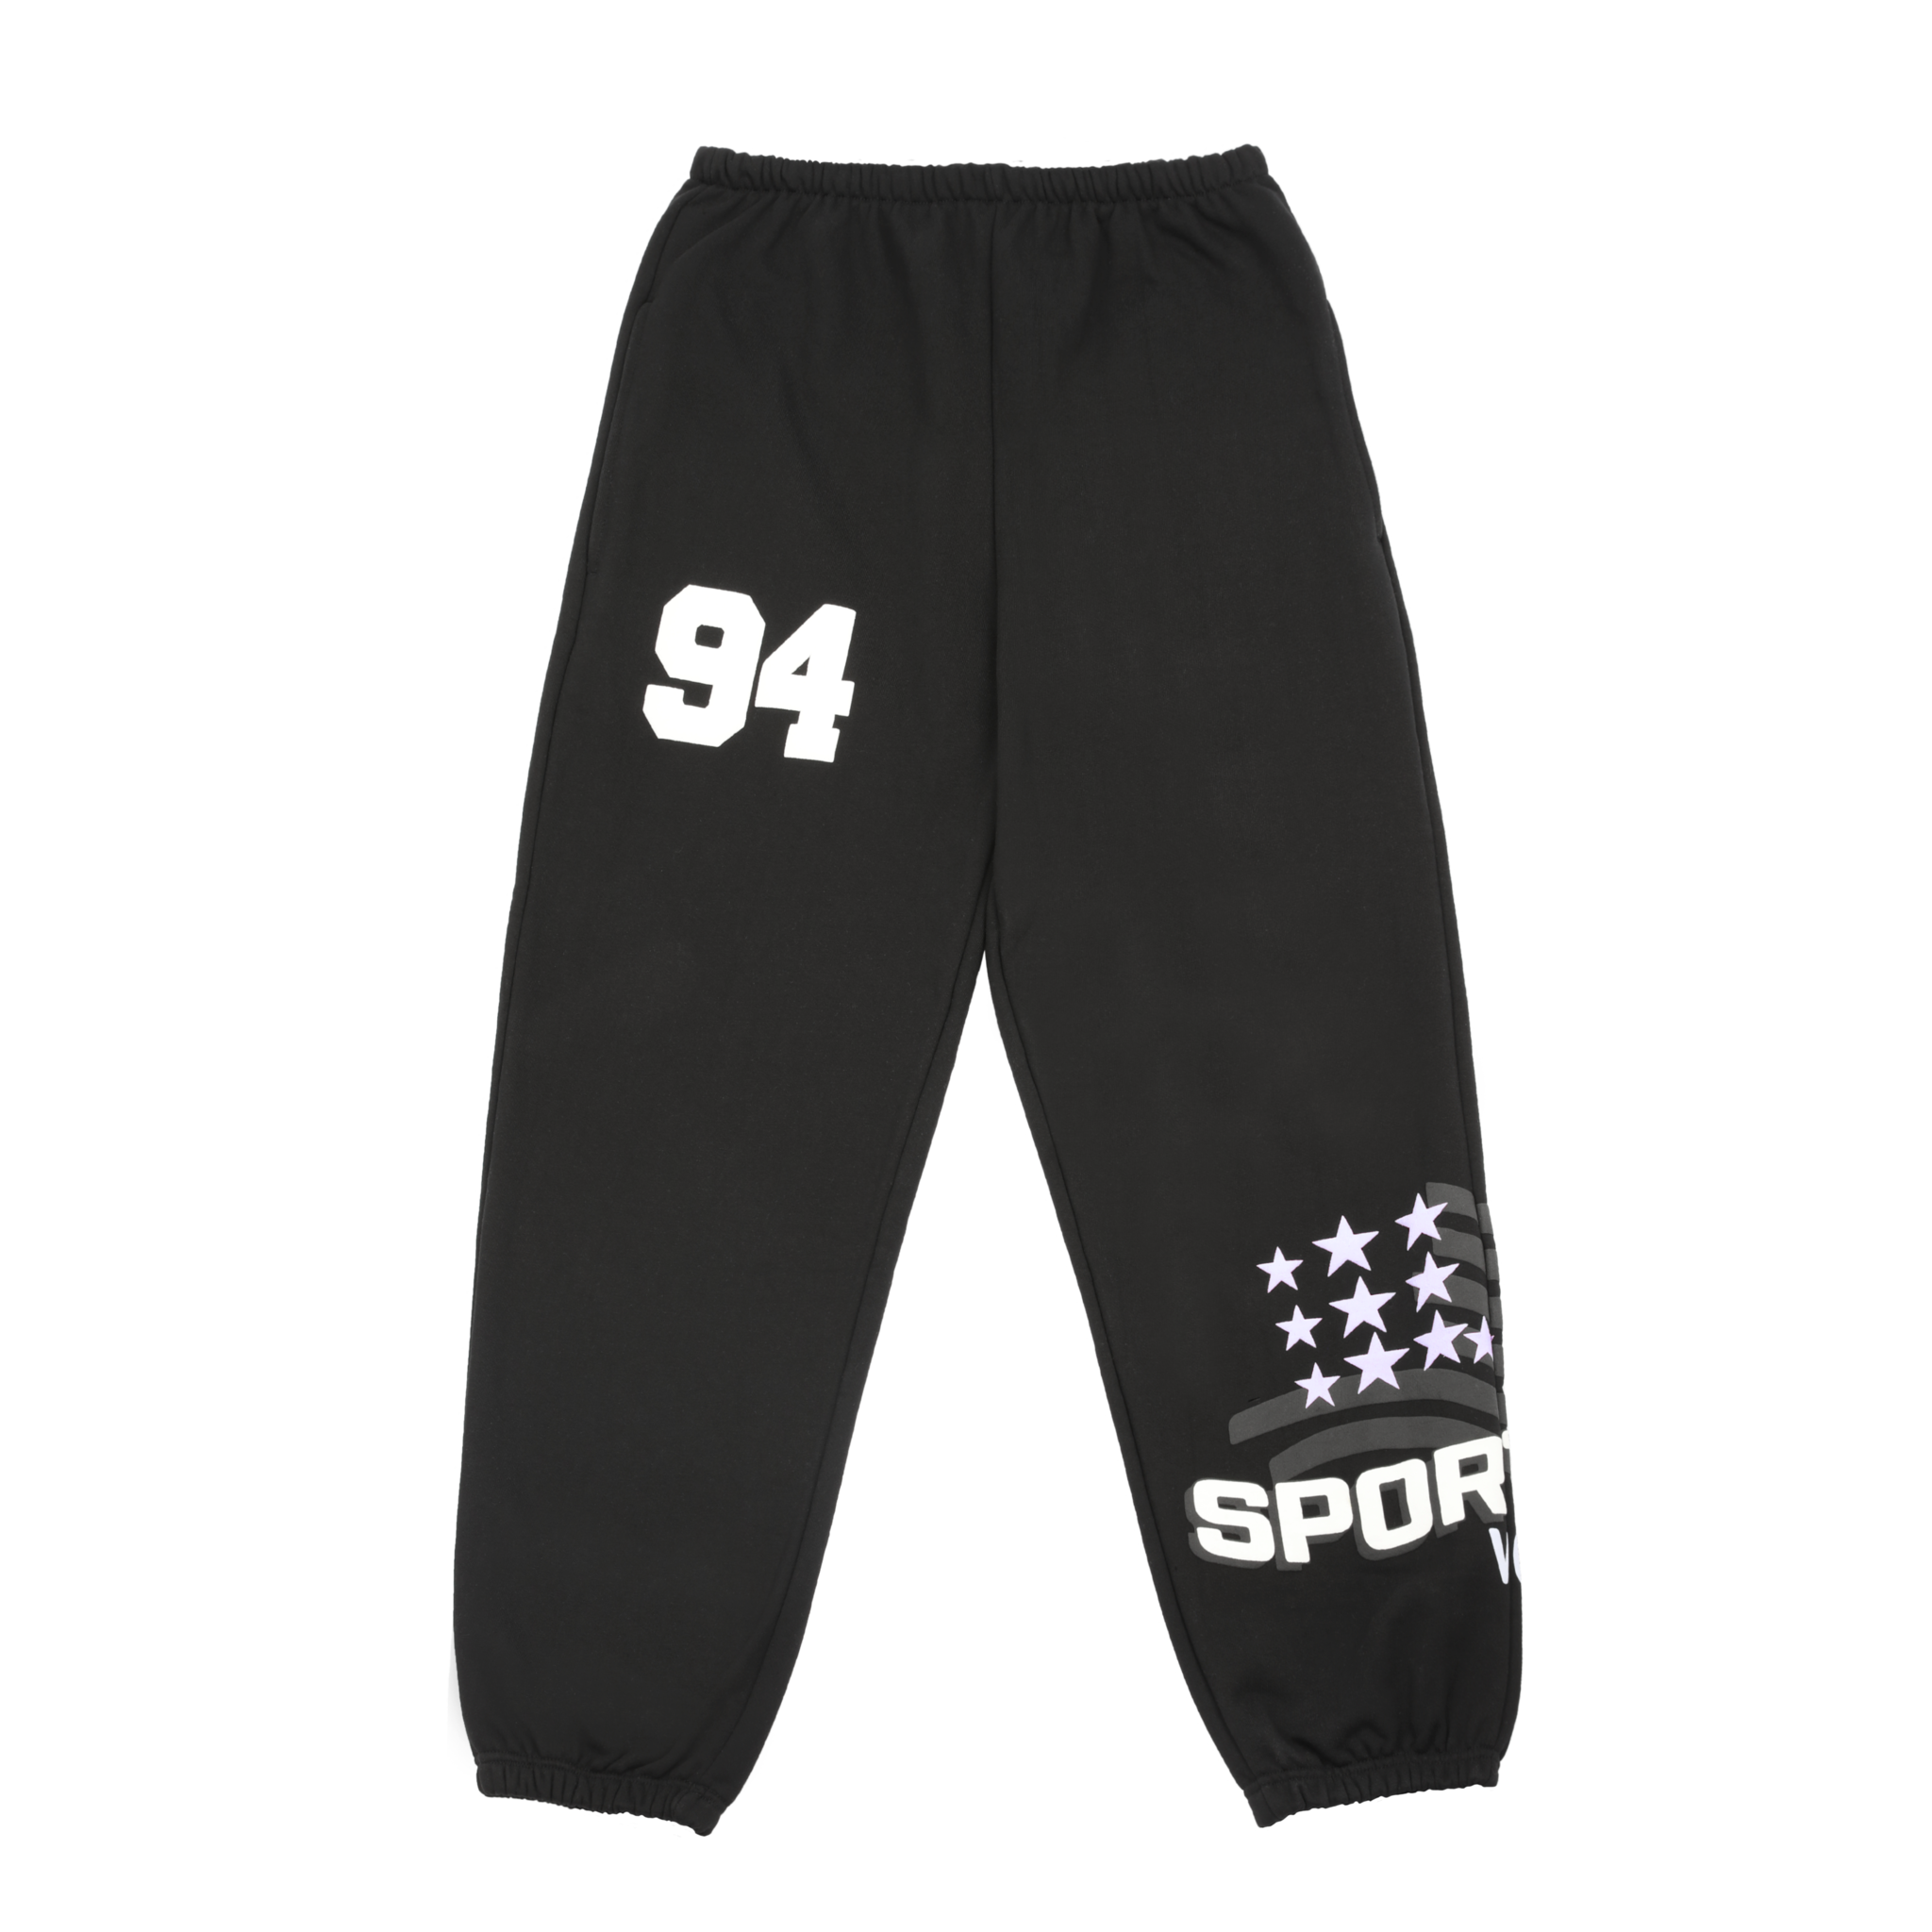 Tuewid Day 94 Sportime sweatpants Black